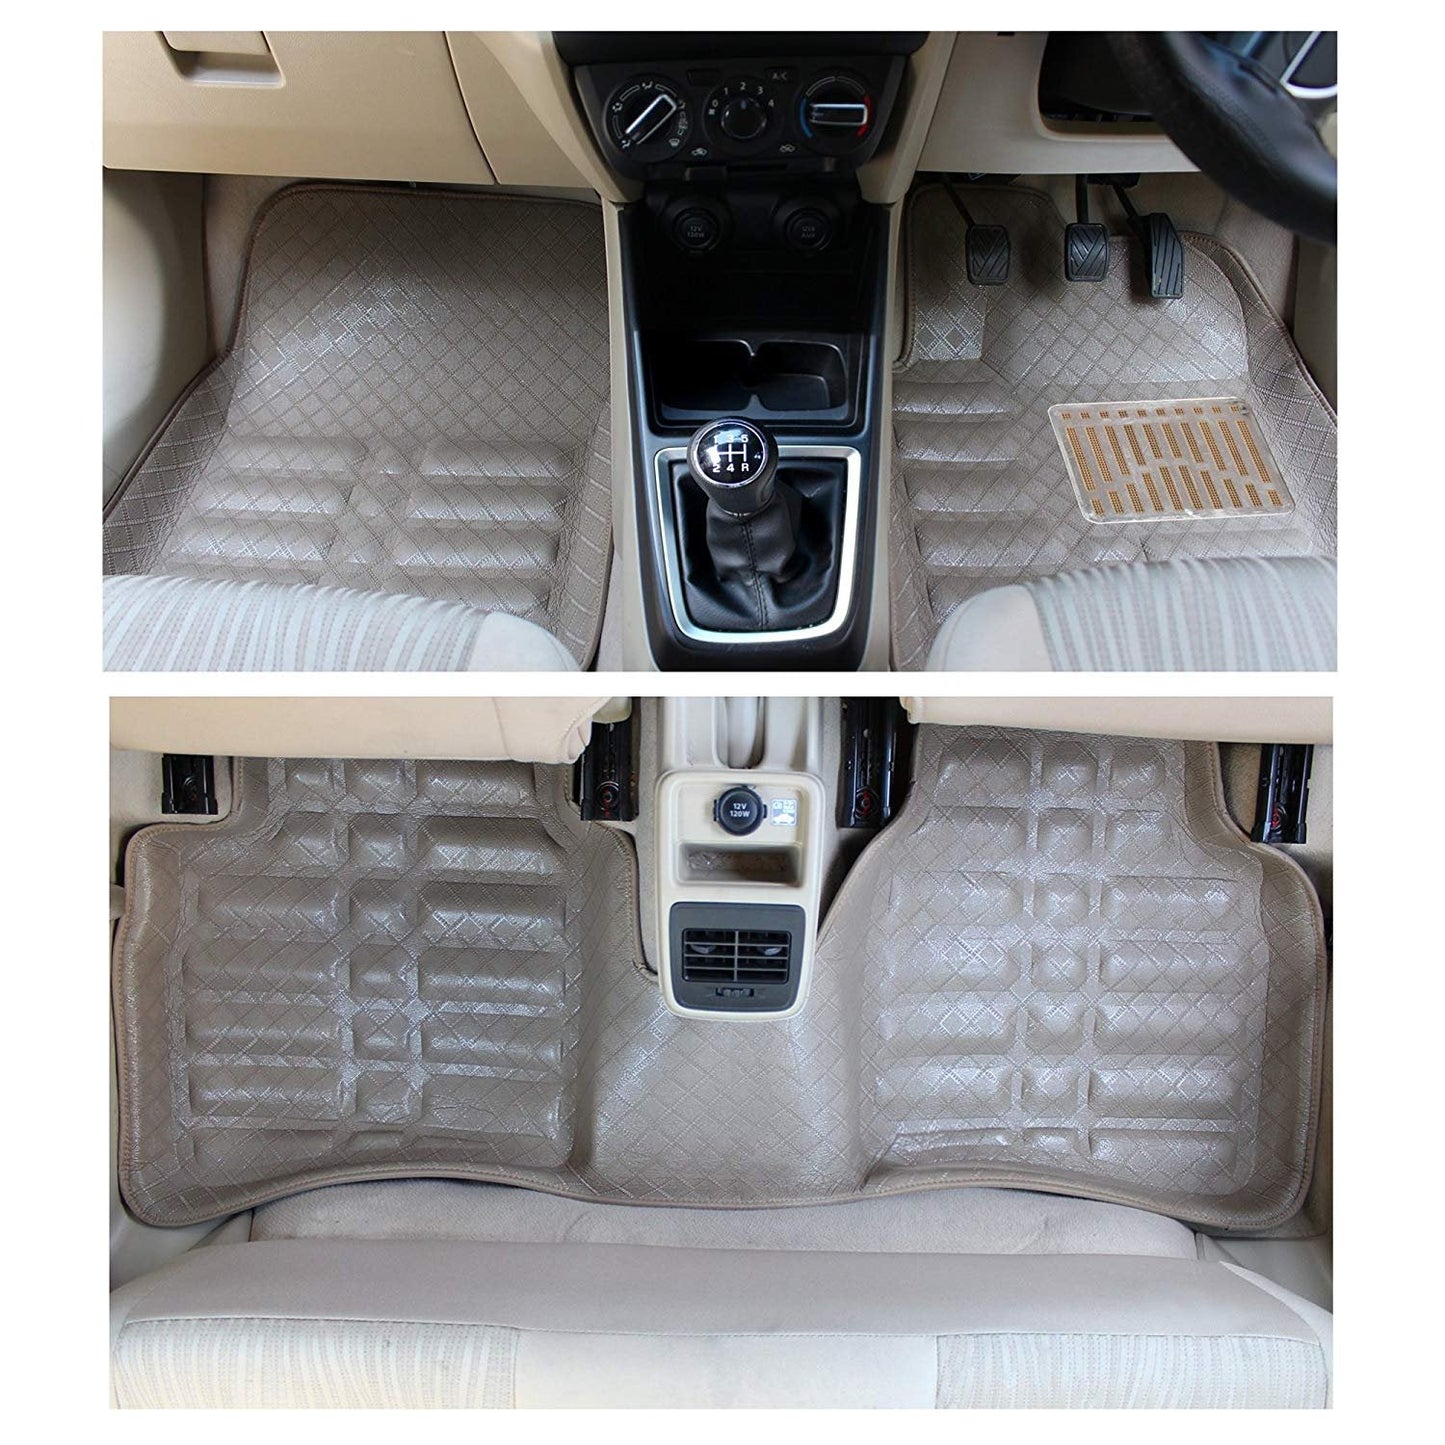 Oshotto 4D Artificial Leather Car Floor Mats For Toyota Innova Crysta - Set of 5 (Complete Mat with 3rd Row and Dicky) - Beige